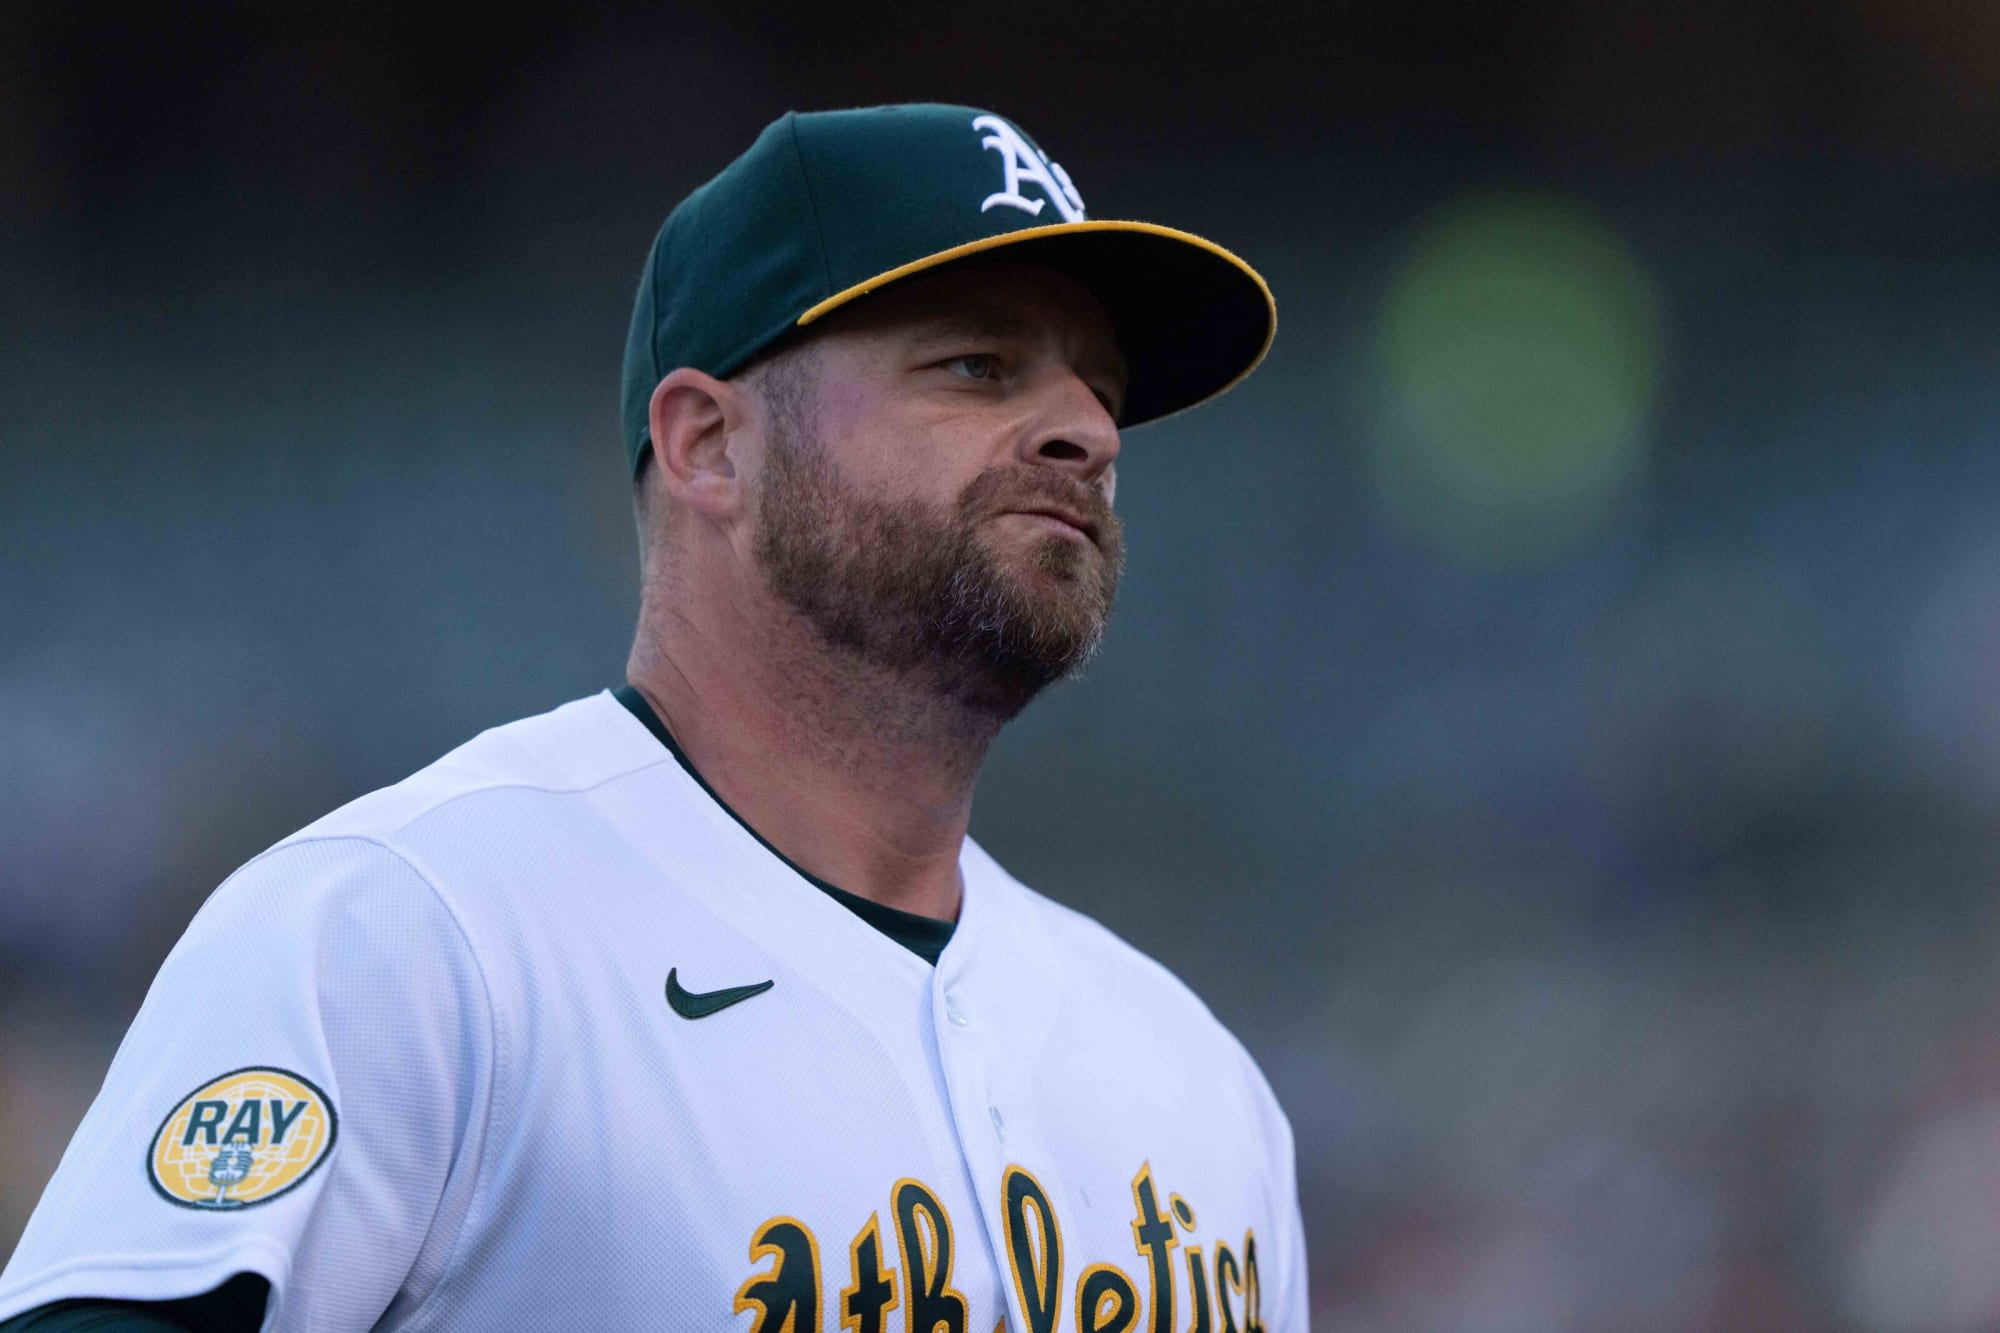 This should be the end of the line for Stephen Vogt